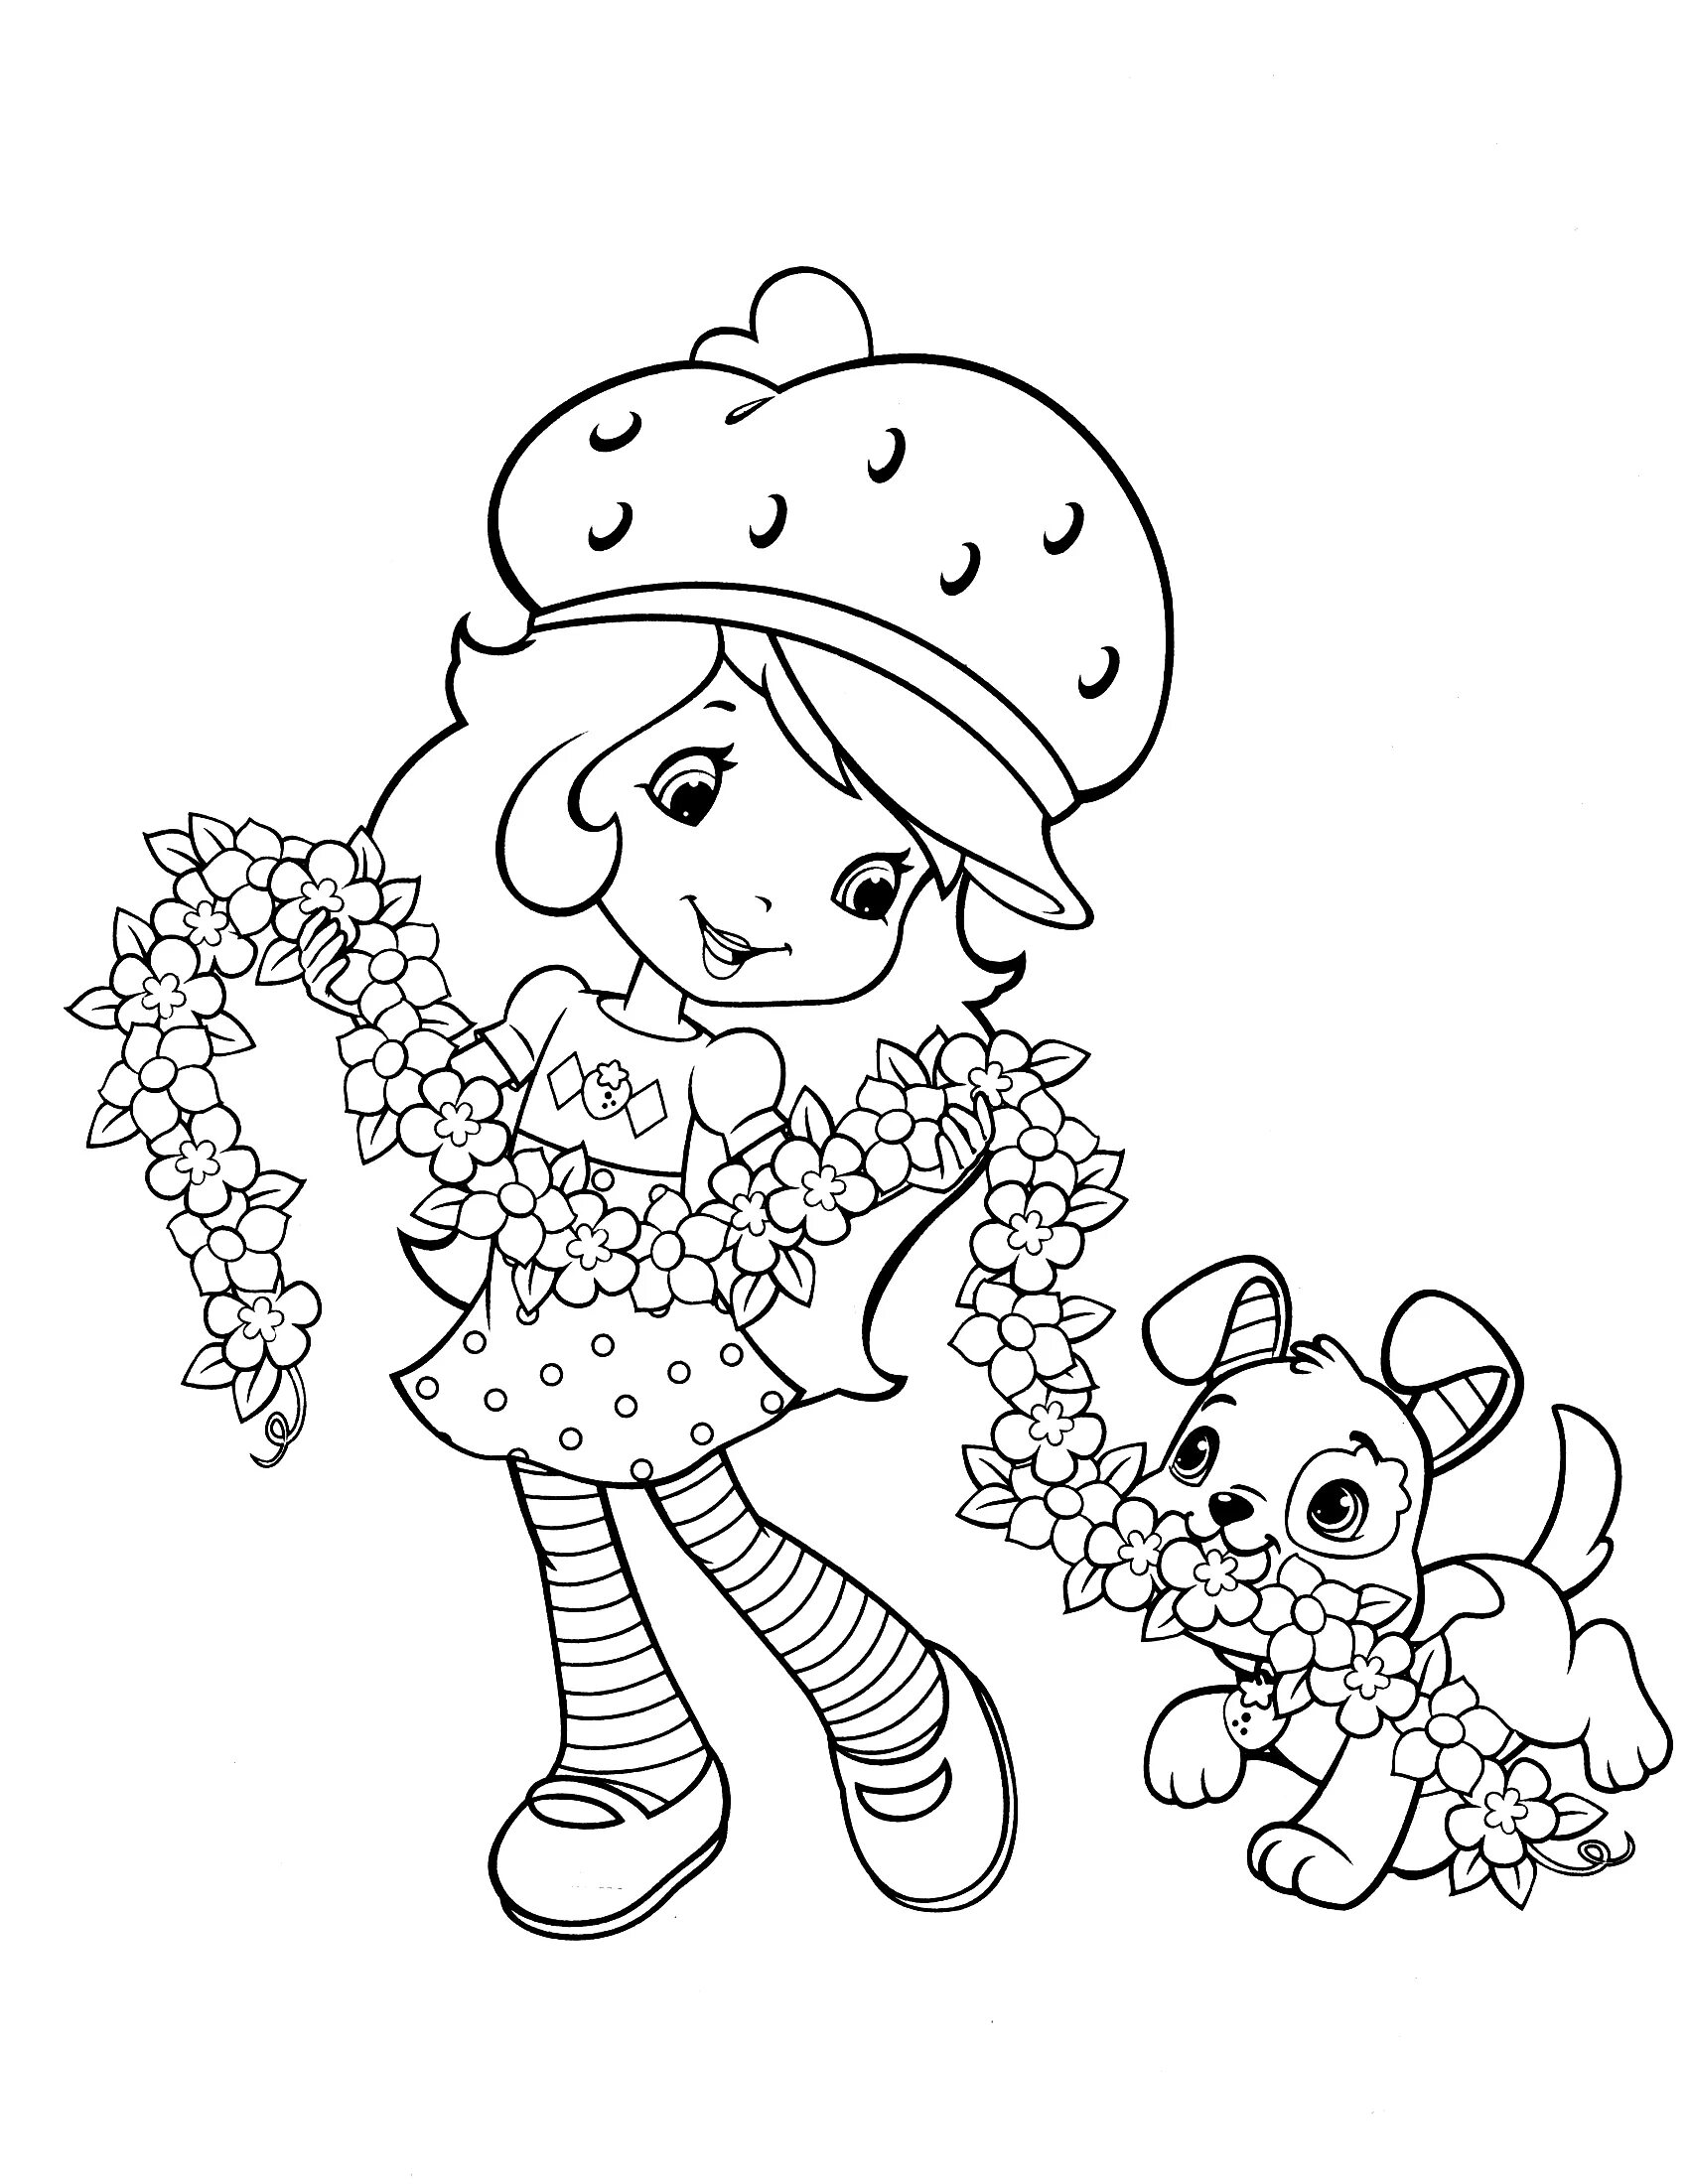 Bright Charlotte Strawberry coloring pages for girls